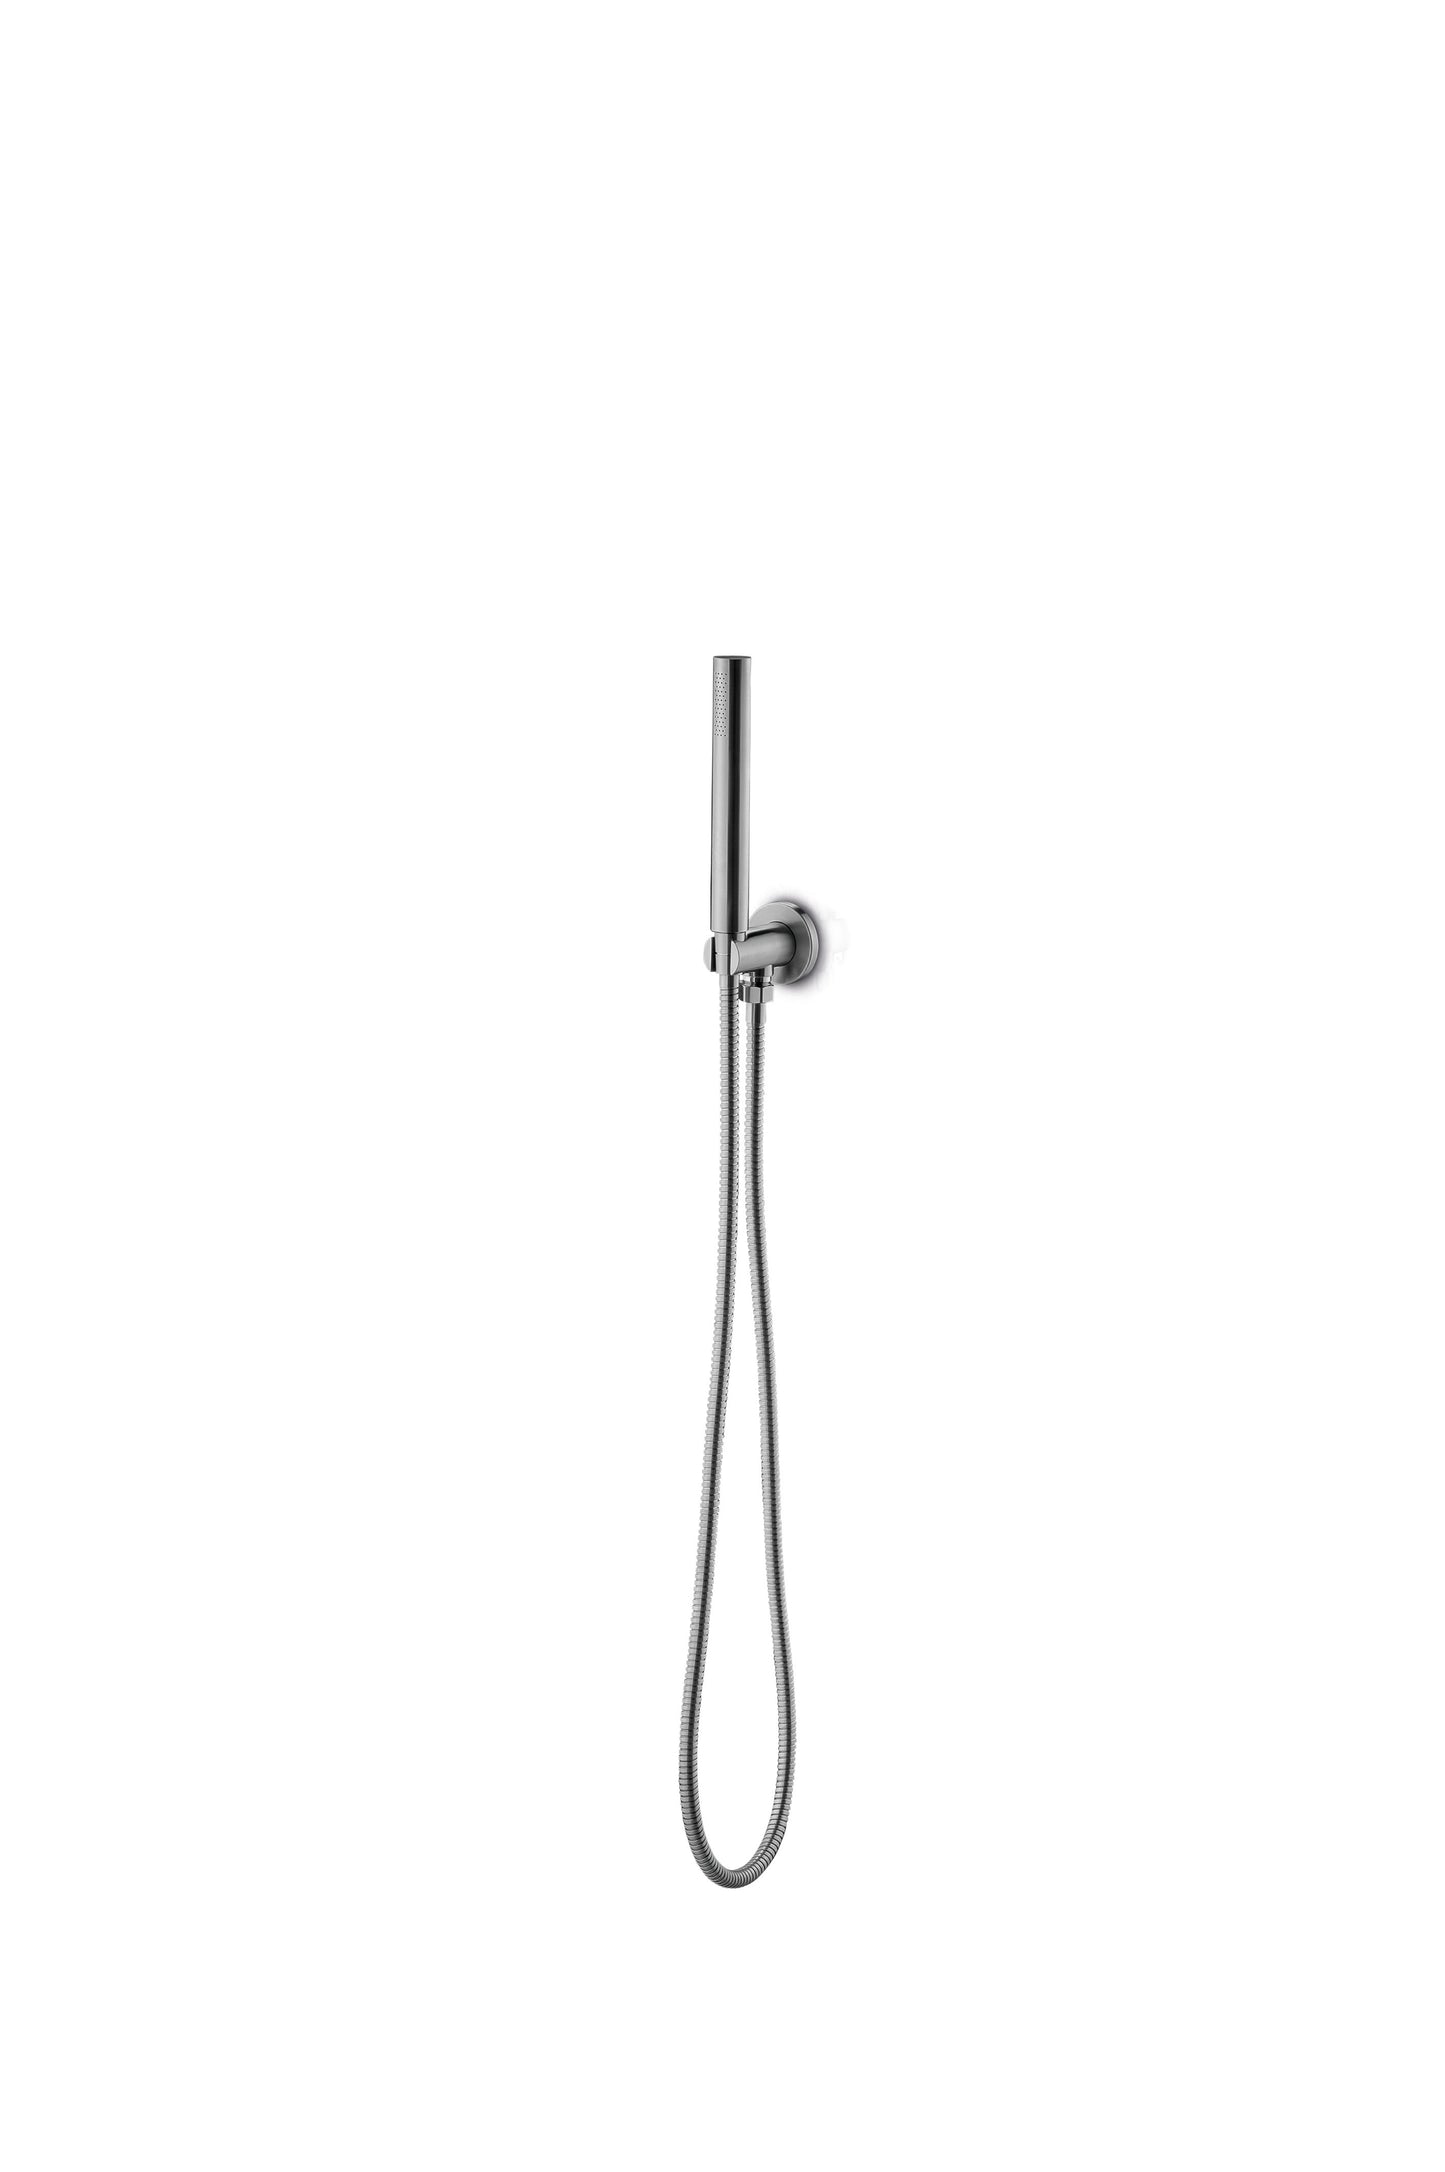 JEE-O Slimline Hand Shower set Stainless Steel with integrated Wall elbow, Brushed